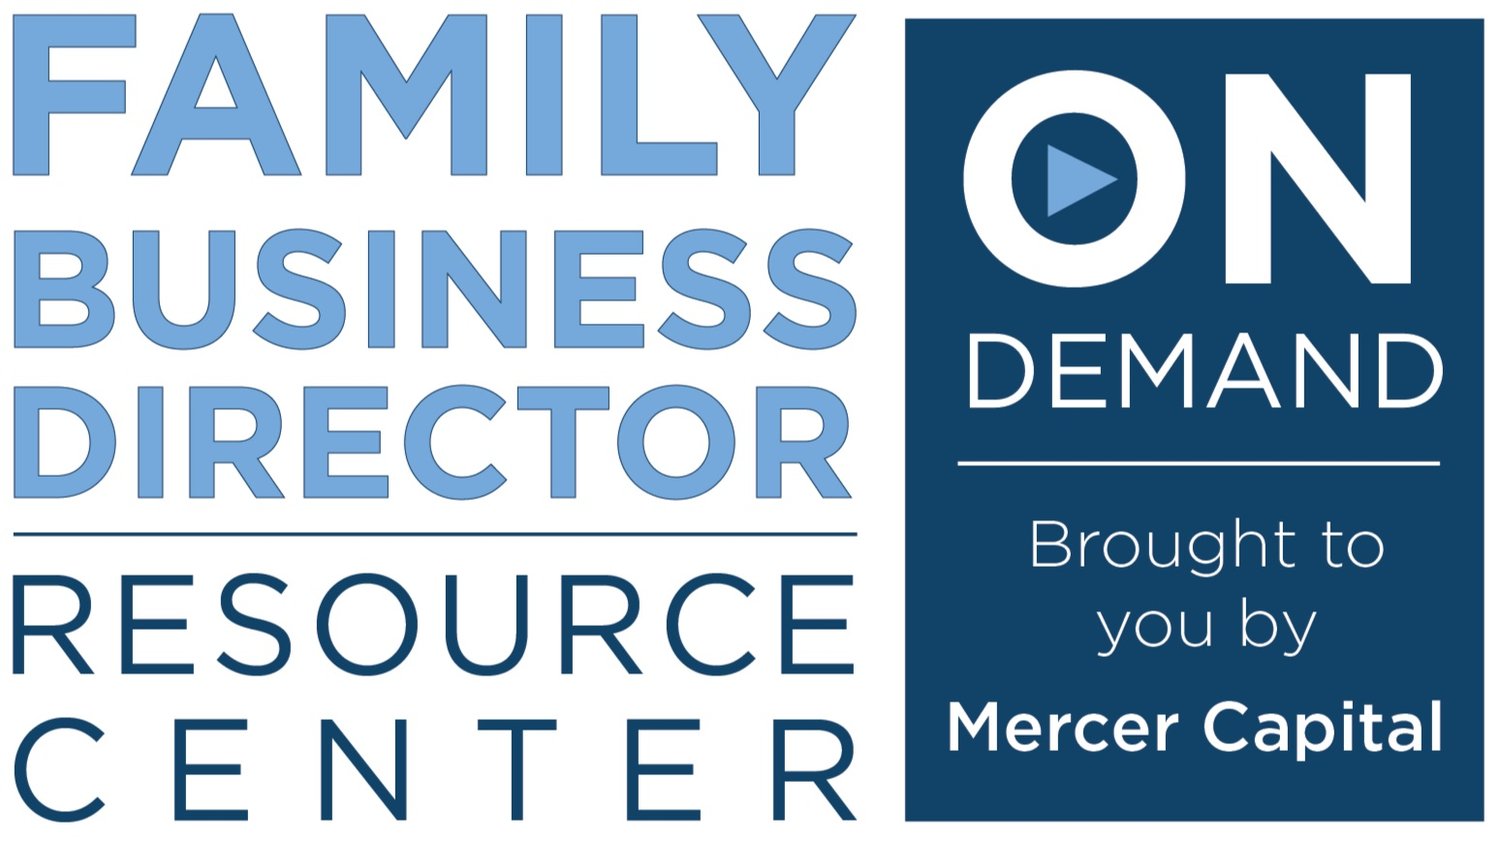 Family Business Director Resource Center